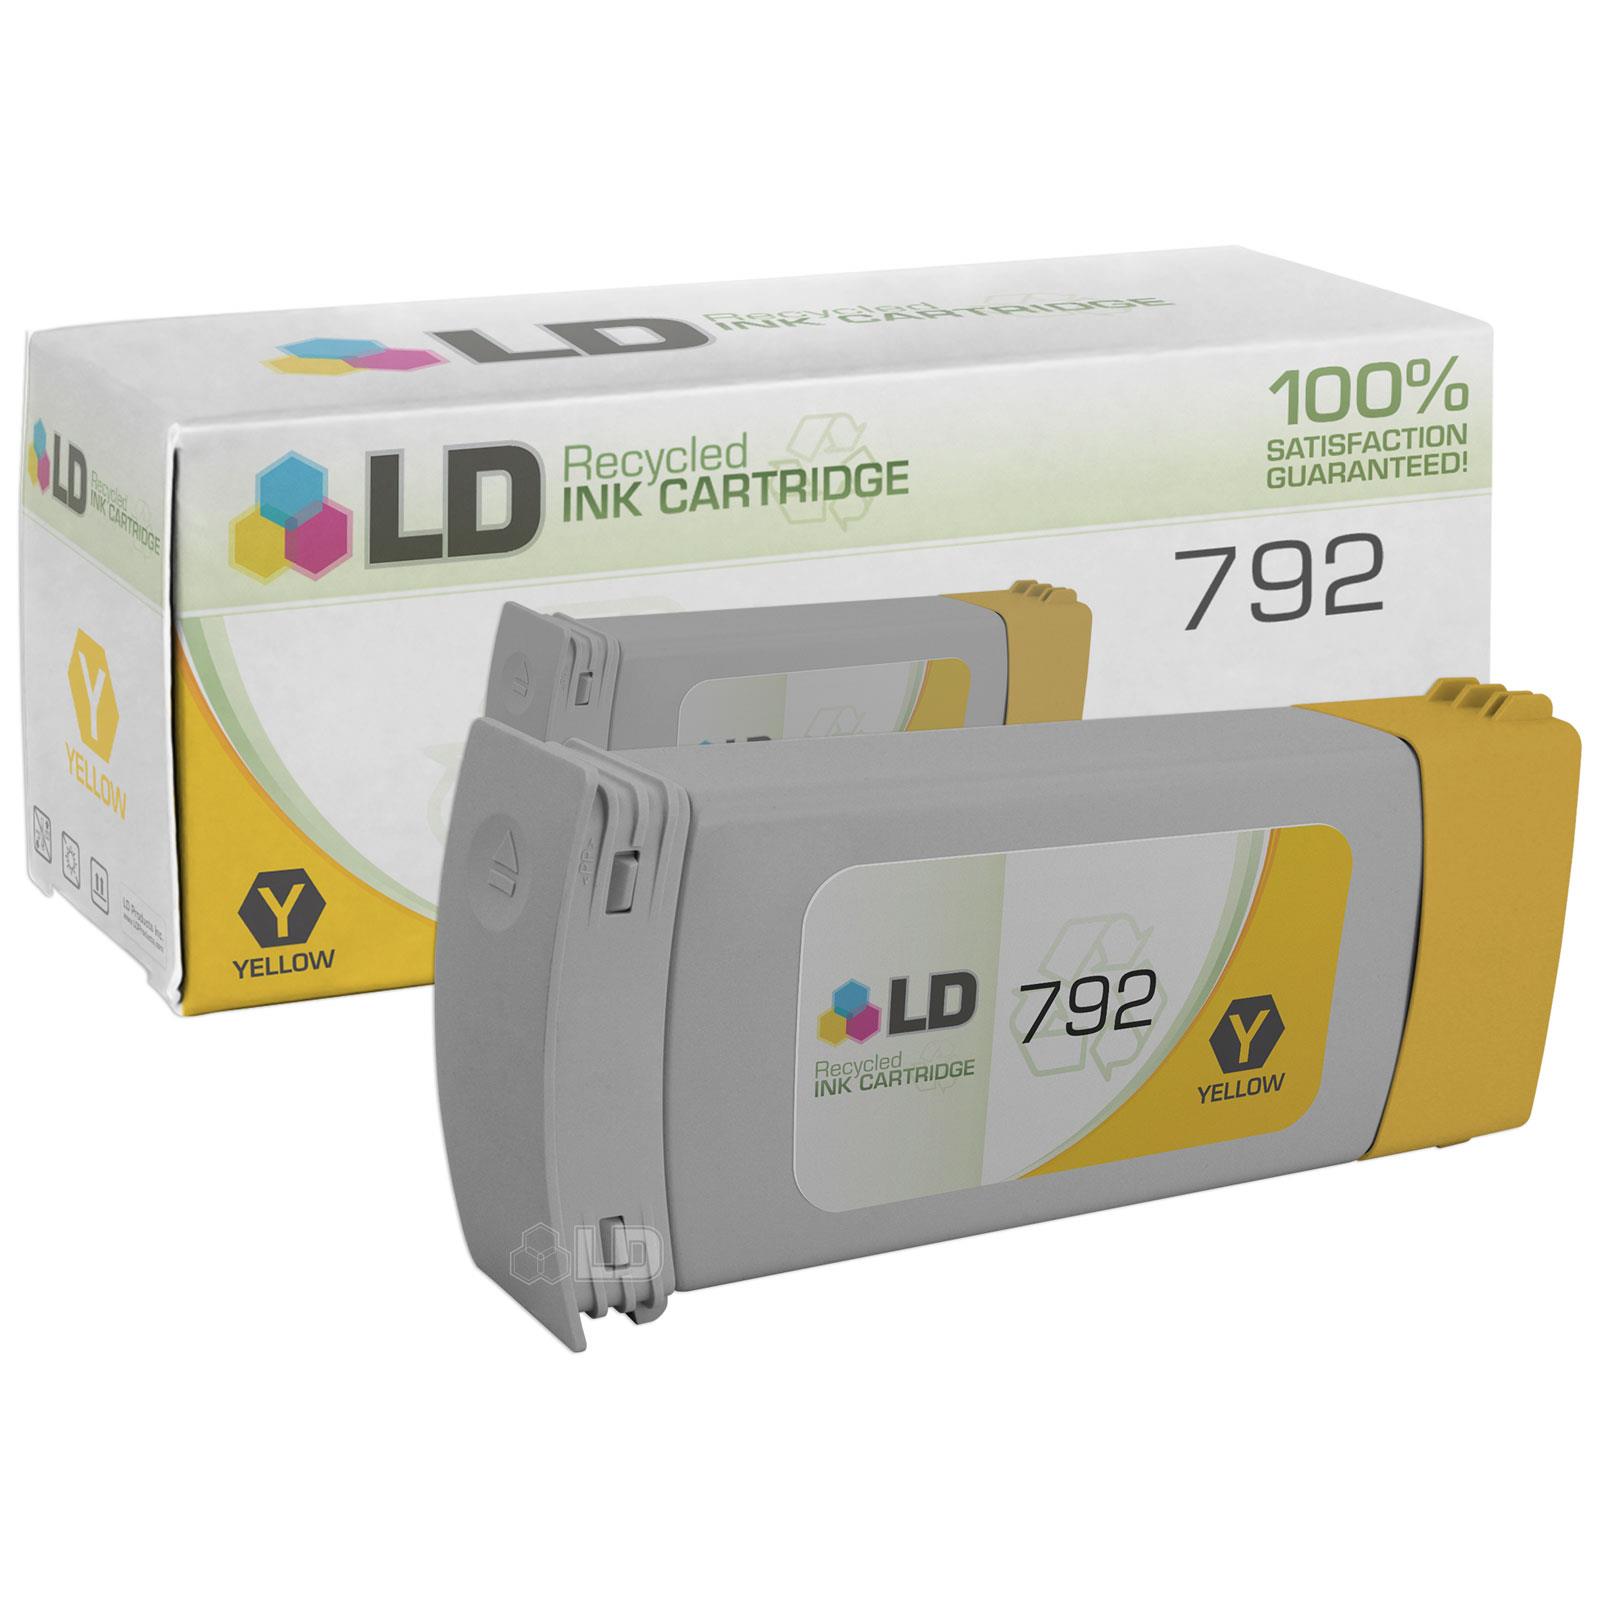 LD © Remanufactured Replacement for Hewlett Packard CN708A / HP 792 Yellow Inkjet Cartridge for use in HP DesignJet L26100, L26500, and L28500 Printers